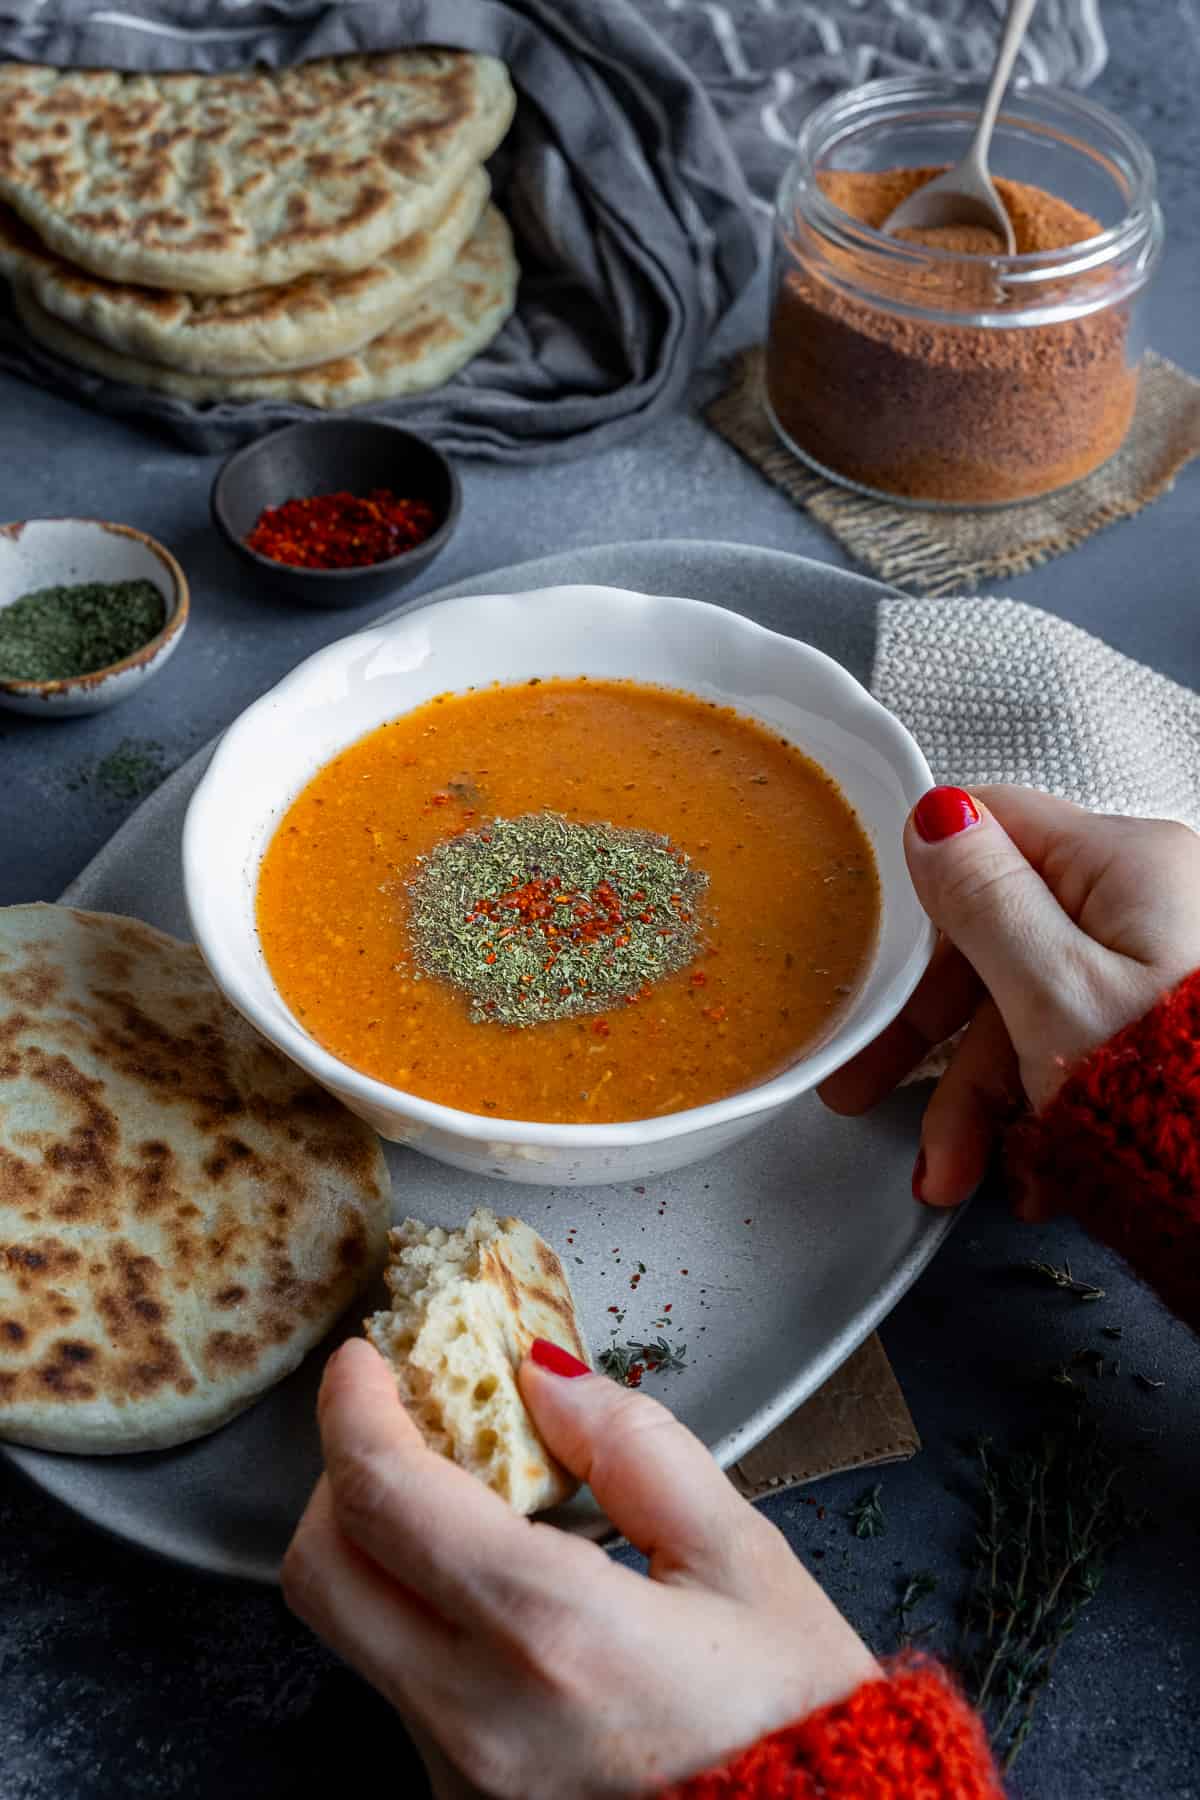 Woman hands holding a bowl of soup and some piece of flatbread accompanied by spices and Turkish tarhana in a jar.